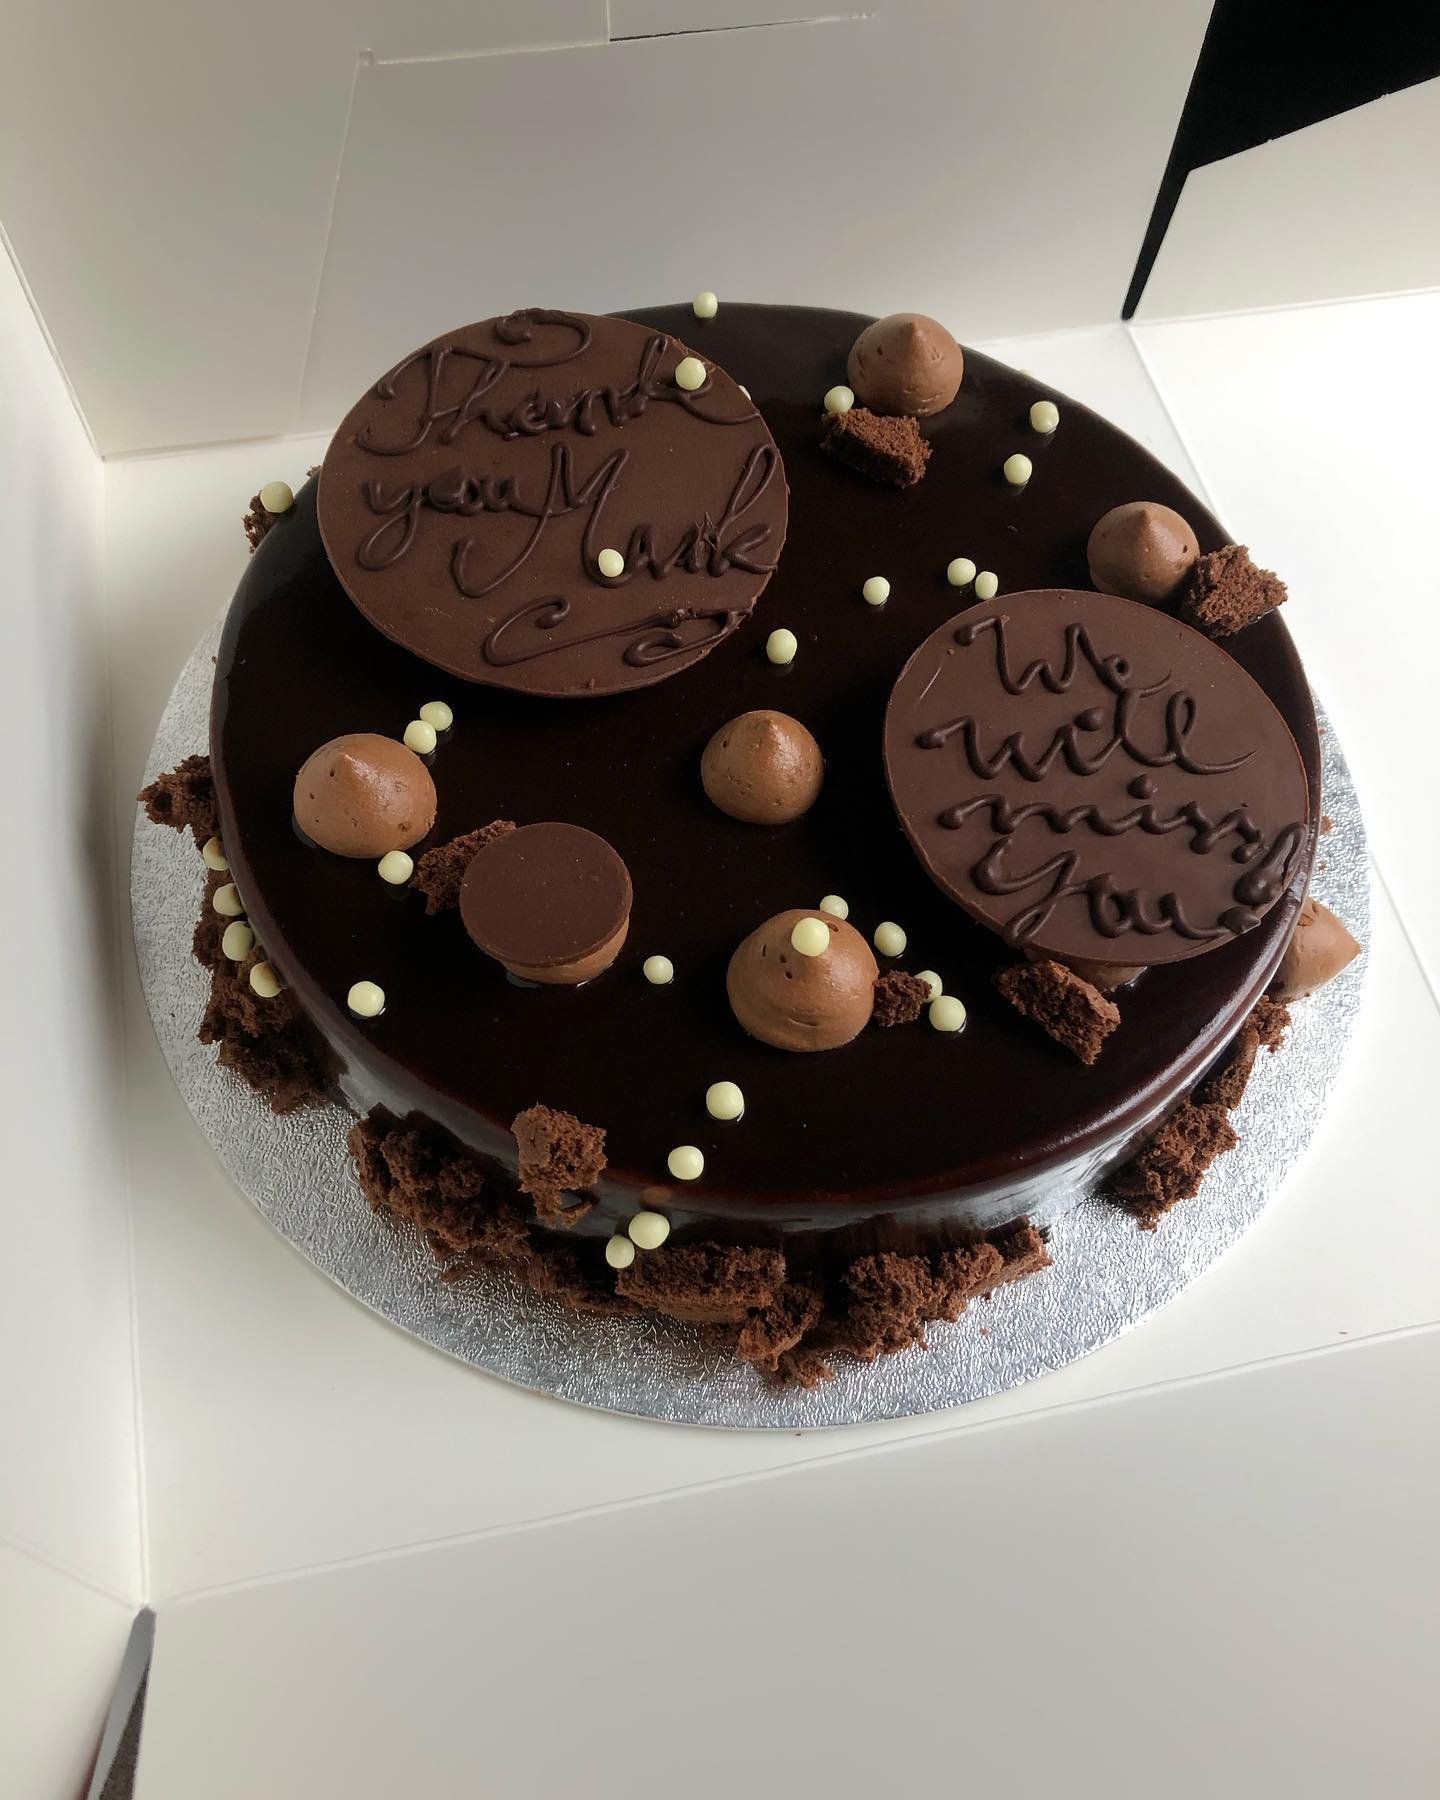 Any messages can be requested on cakes, just keep it short, creative and kind. 😊 

#shutishuti #patisserie #patisserieyork #chocolatemoussecake #gateaux #yorkfood